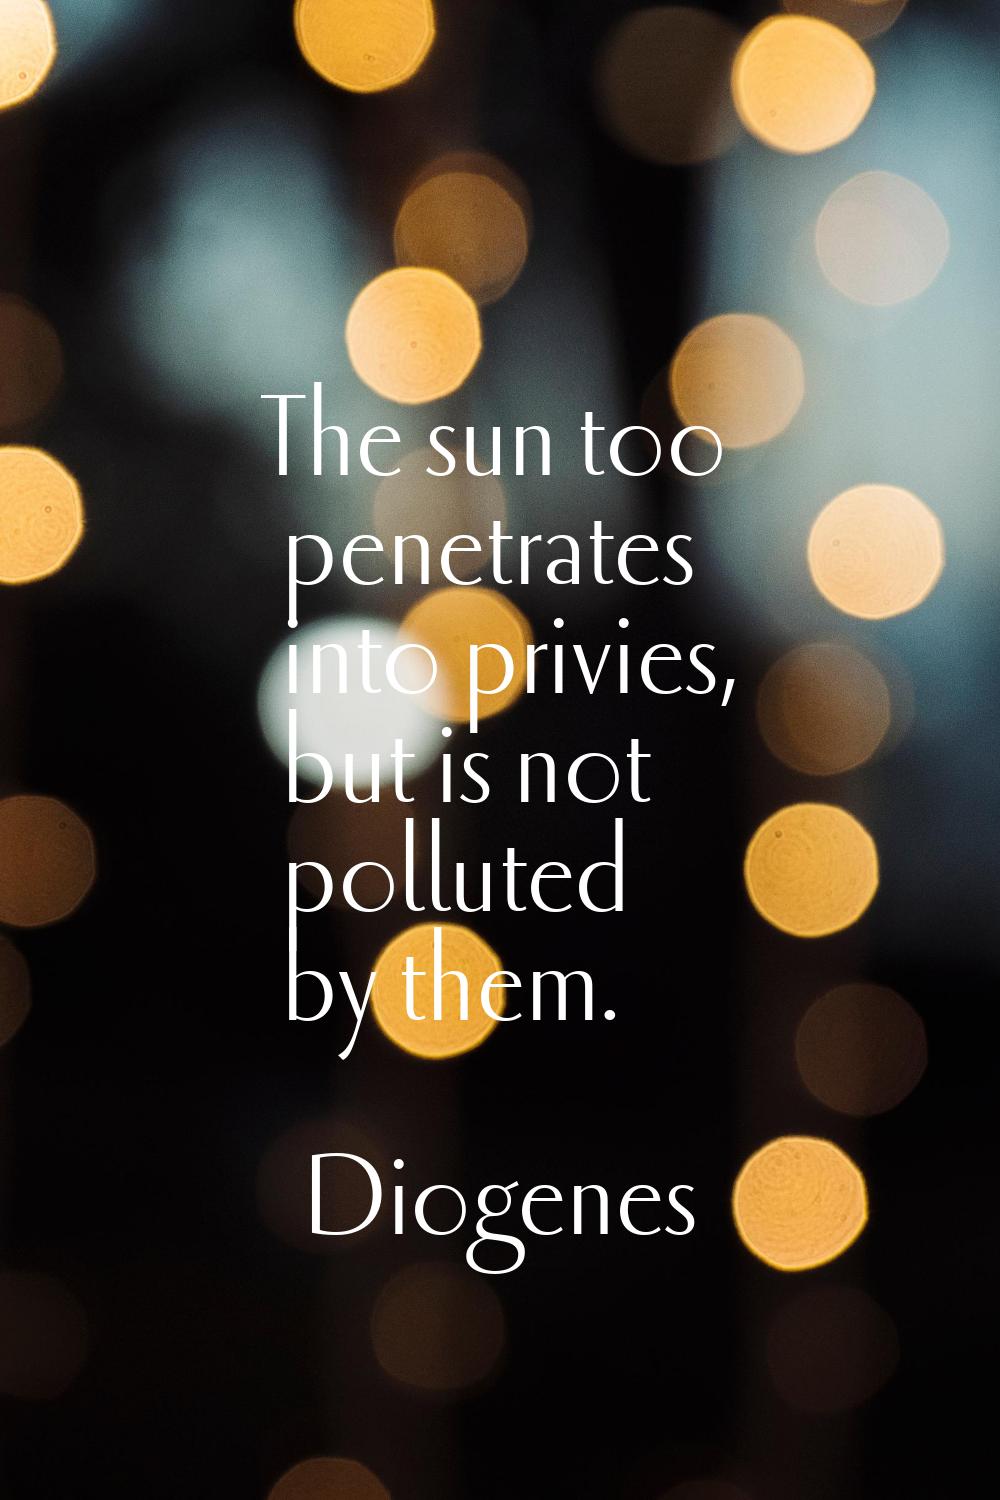 The sun too penetrates into privies, but is not polluted by them.